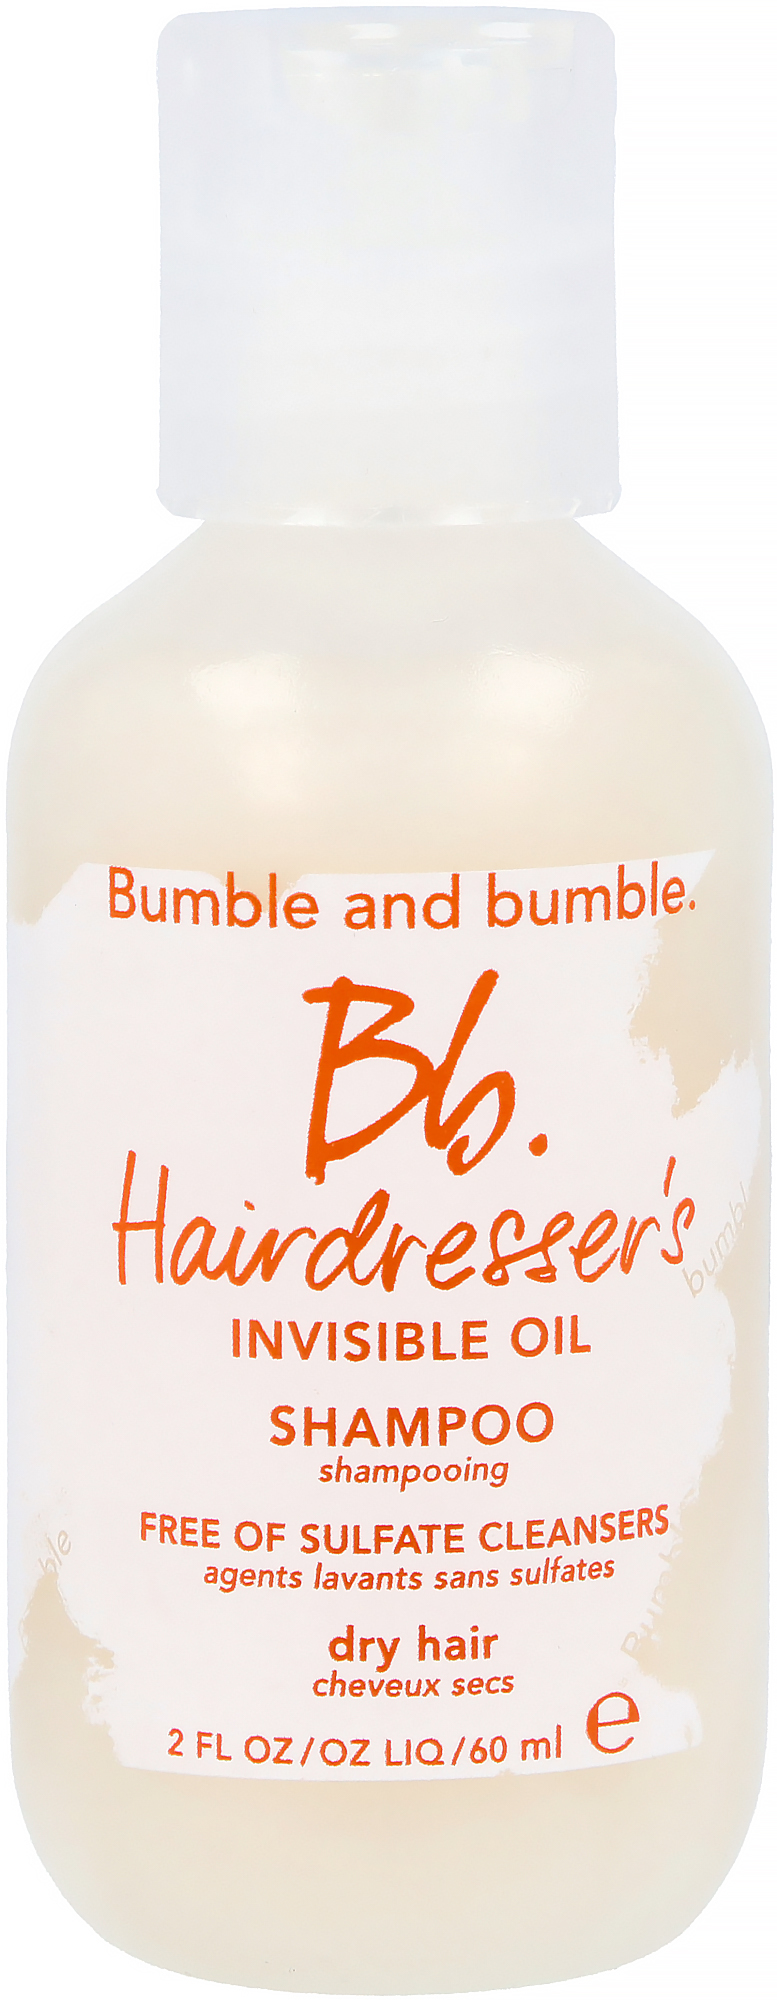 Bumble and bumble Hairdresser´s Invisible Oil Shampoo 60ml